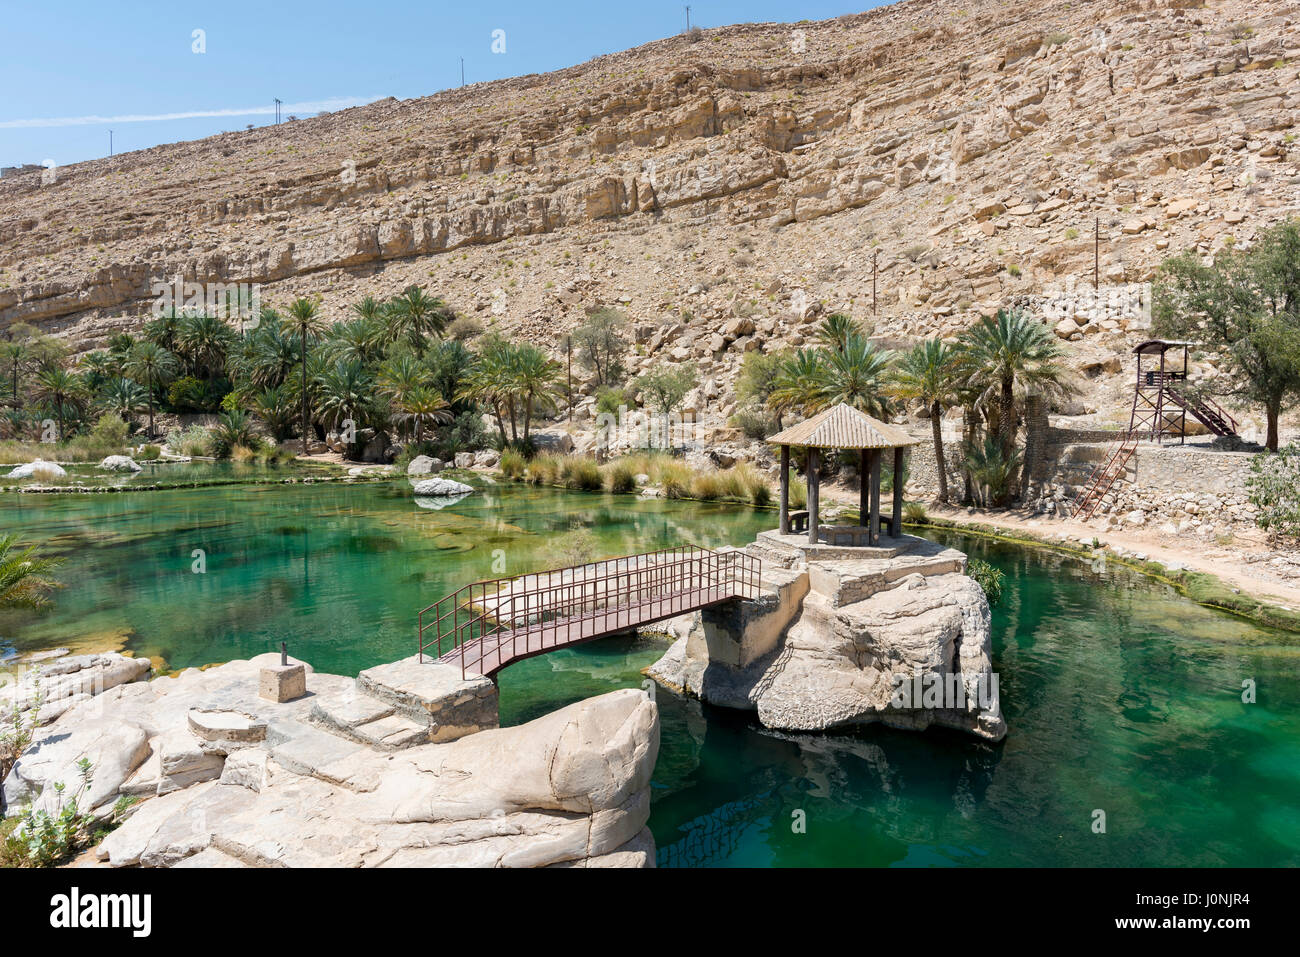 Rest area in one of the pool of Wadi Bani Khalid, Oman Stock Photo